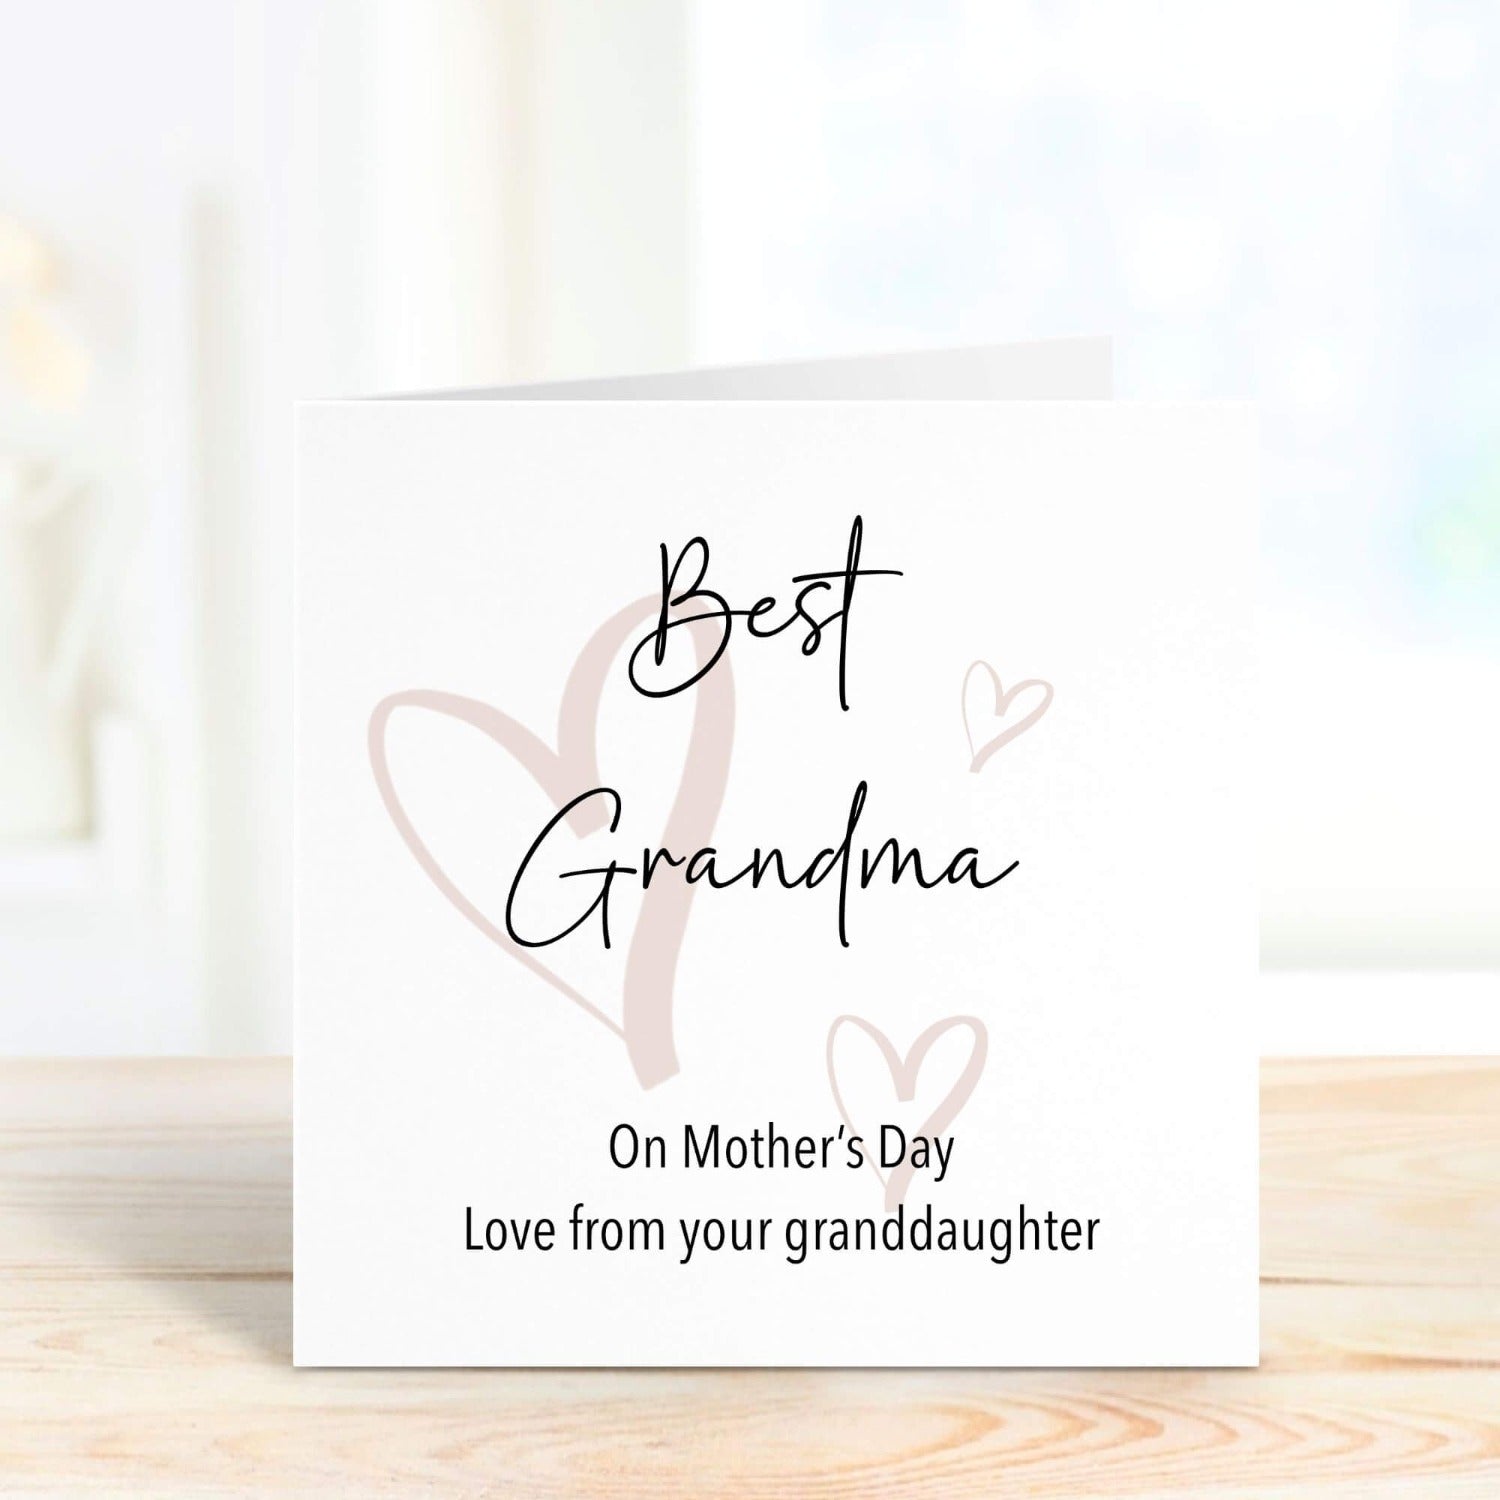 personalised card for grandma on mother's day